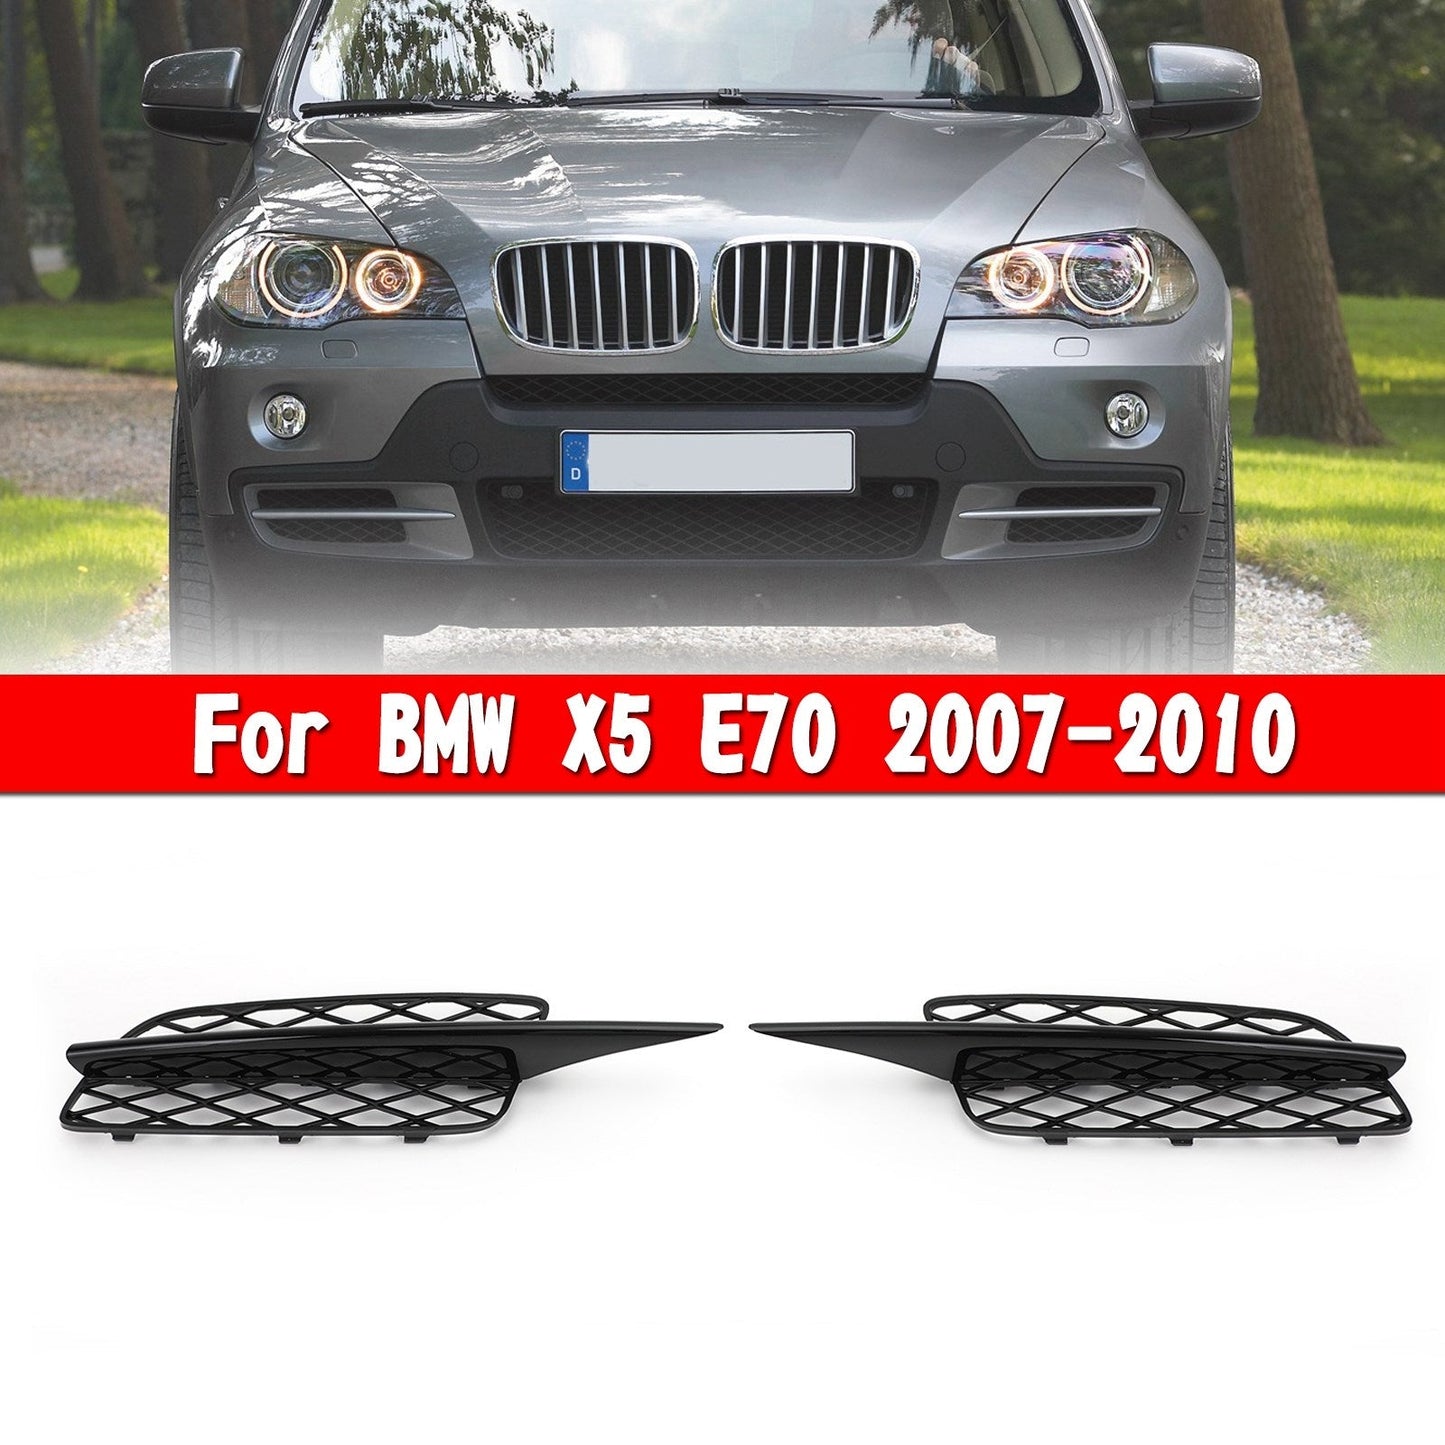 Pair Front Bumper Fog Light Grill Grille Fit BMW X5 E70 2007-2010